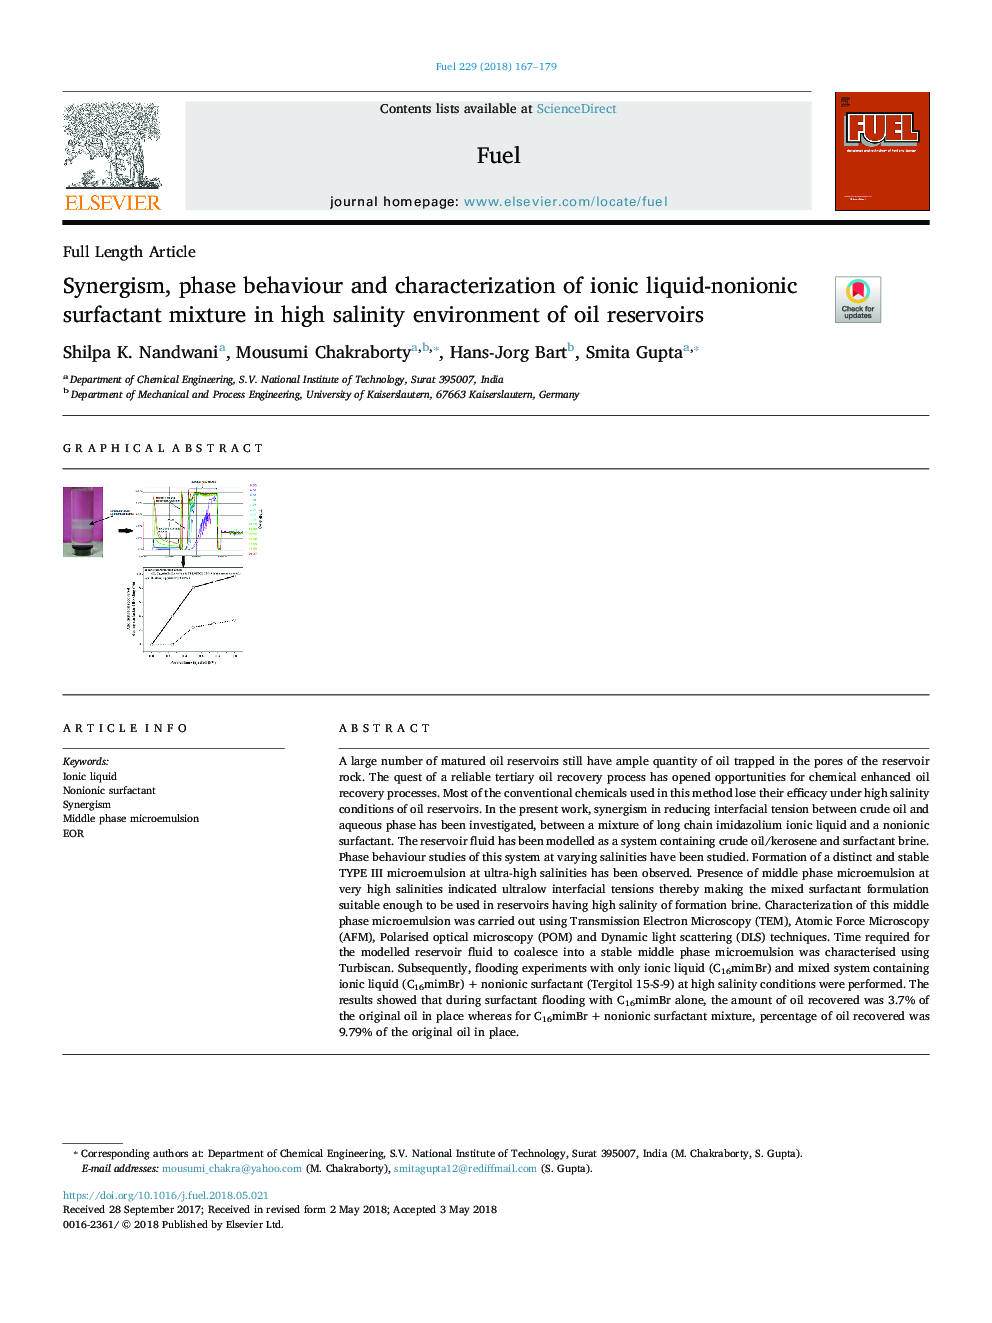 Synergism, phase behaviour and characterization of ionic liquid-nonionic surfactant mixture in high salinity environment of oil reservoirs